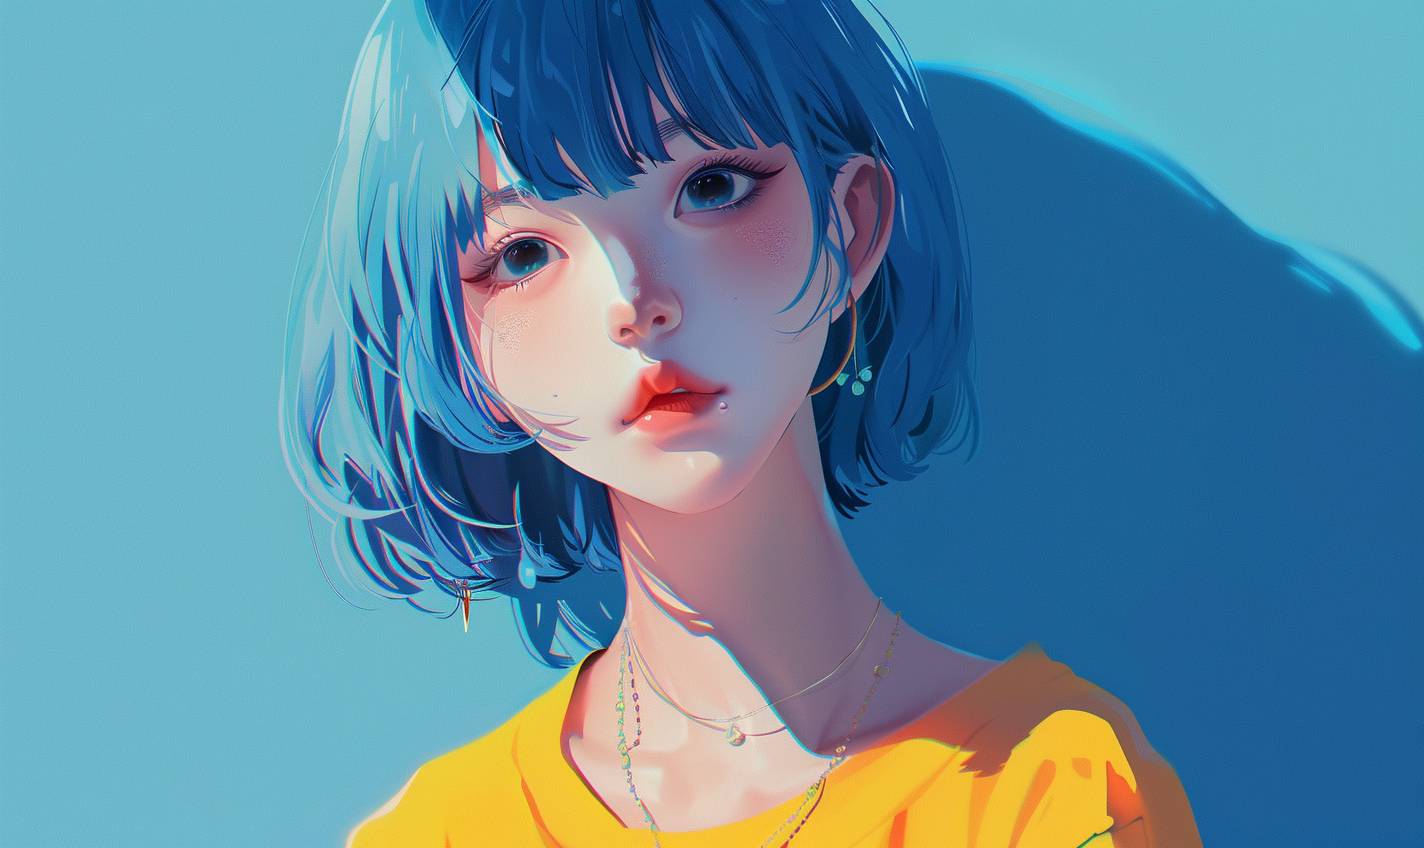 Beautiful anime style illustration of [SUBJECT], wearing vibrant flat colors on a blue background with a pastel color palette. Bright daylight lighting is used, yellowcore.